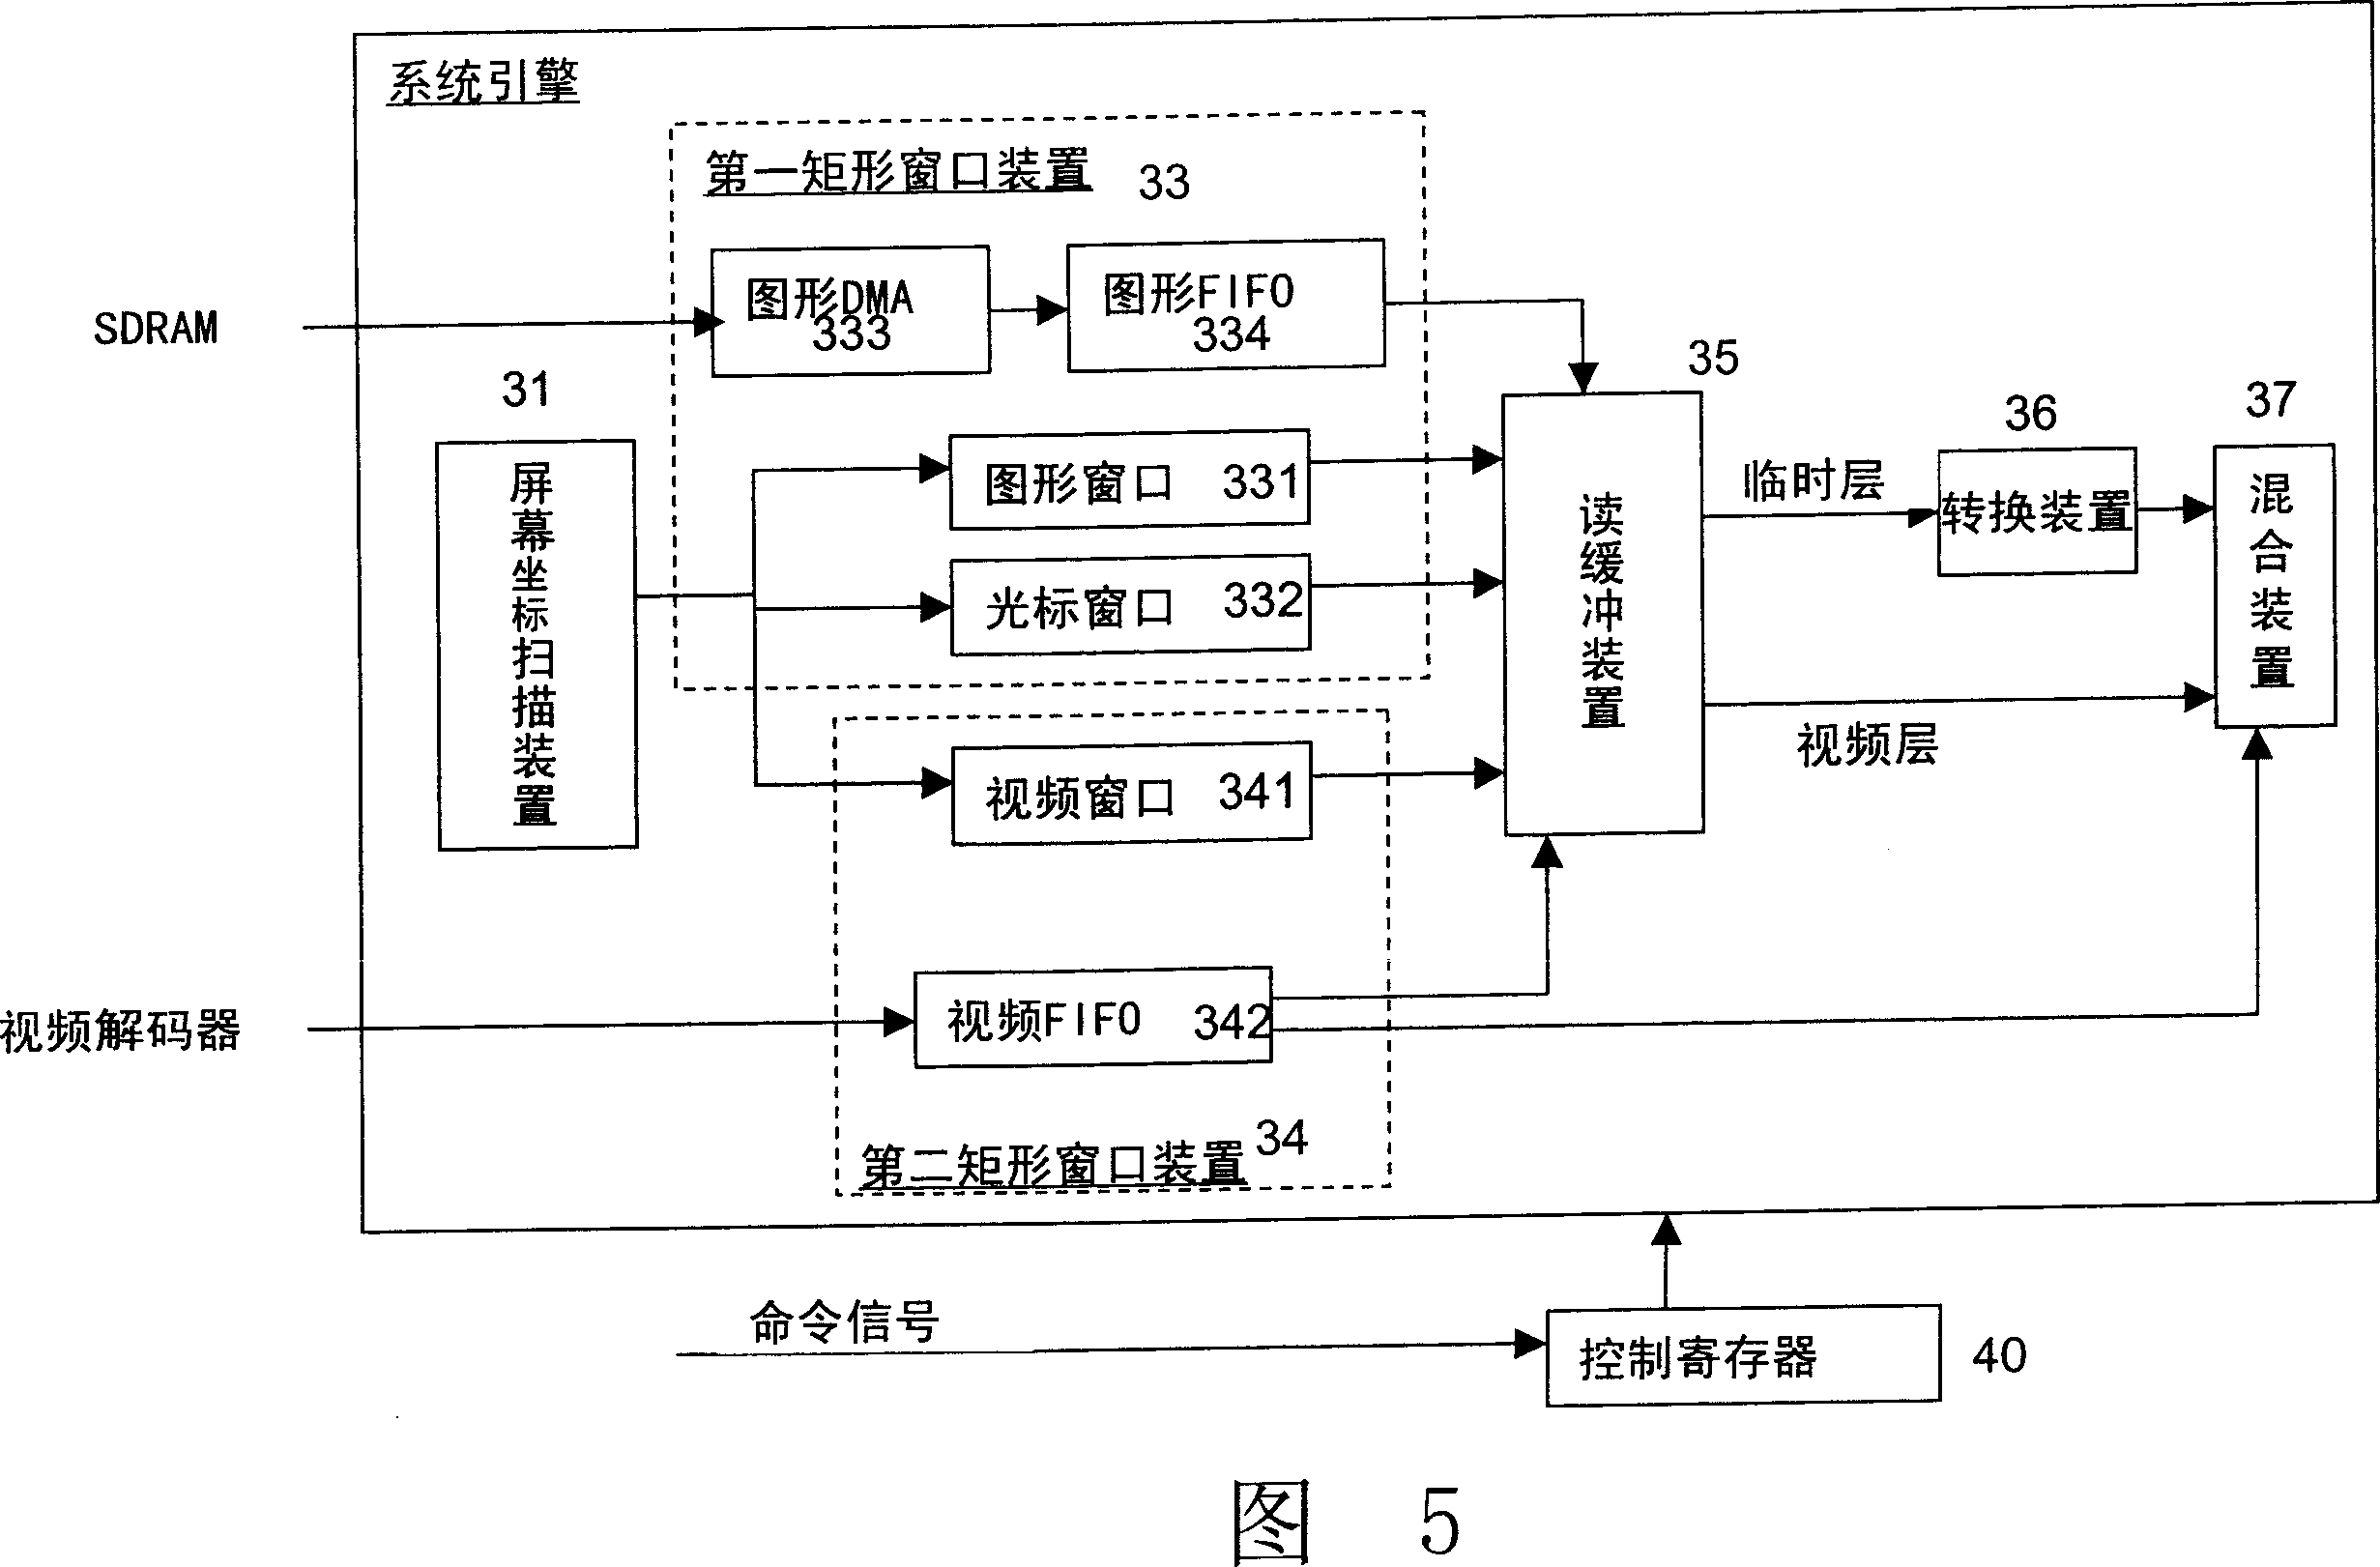 Screen display mixing system and method